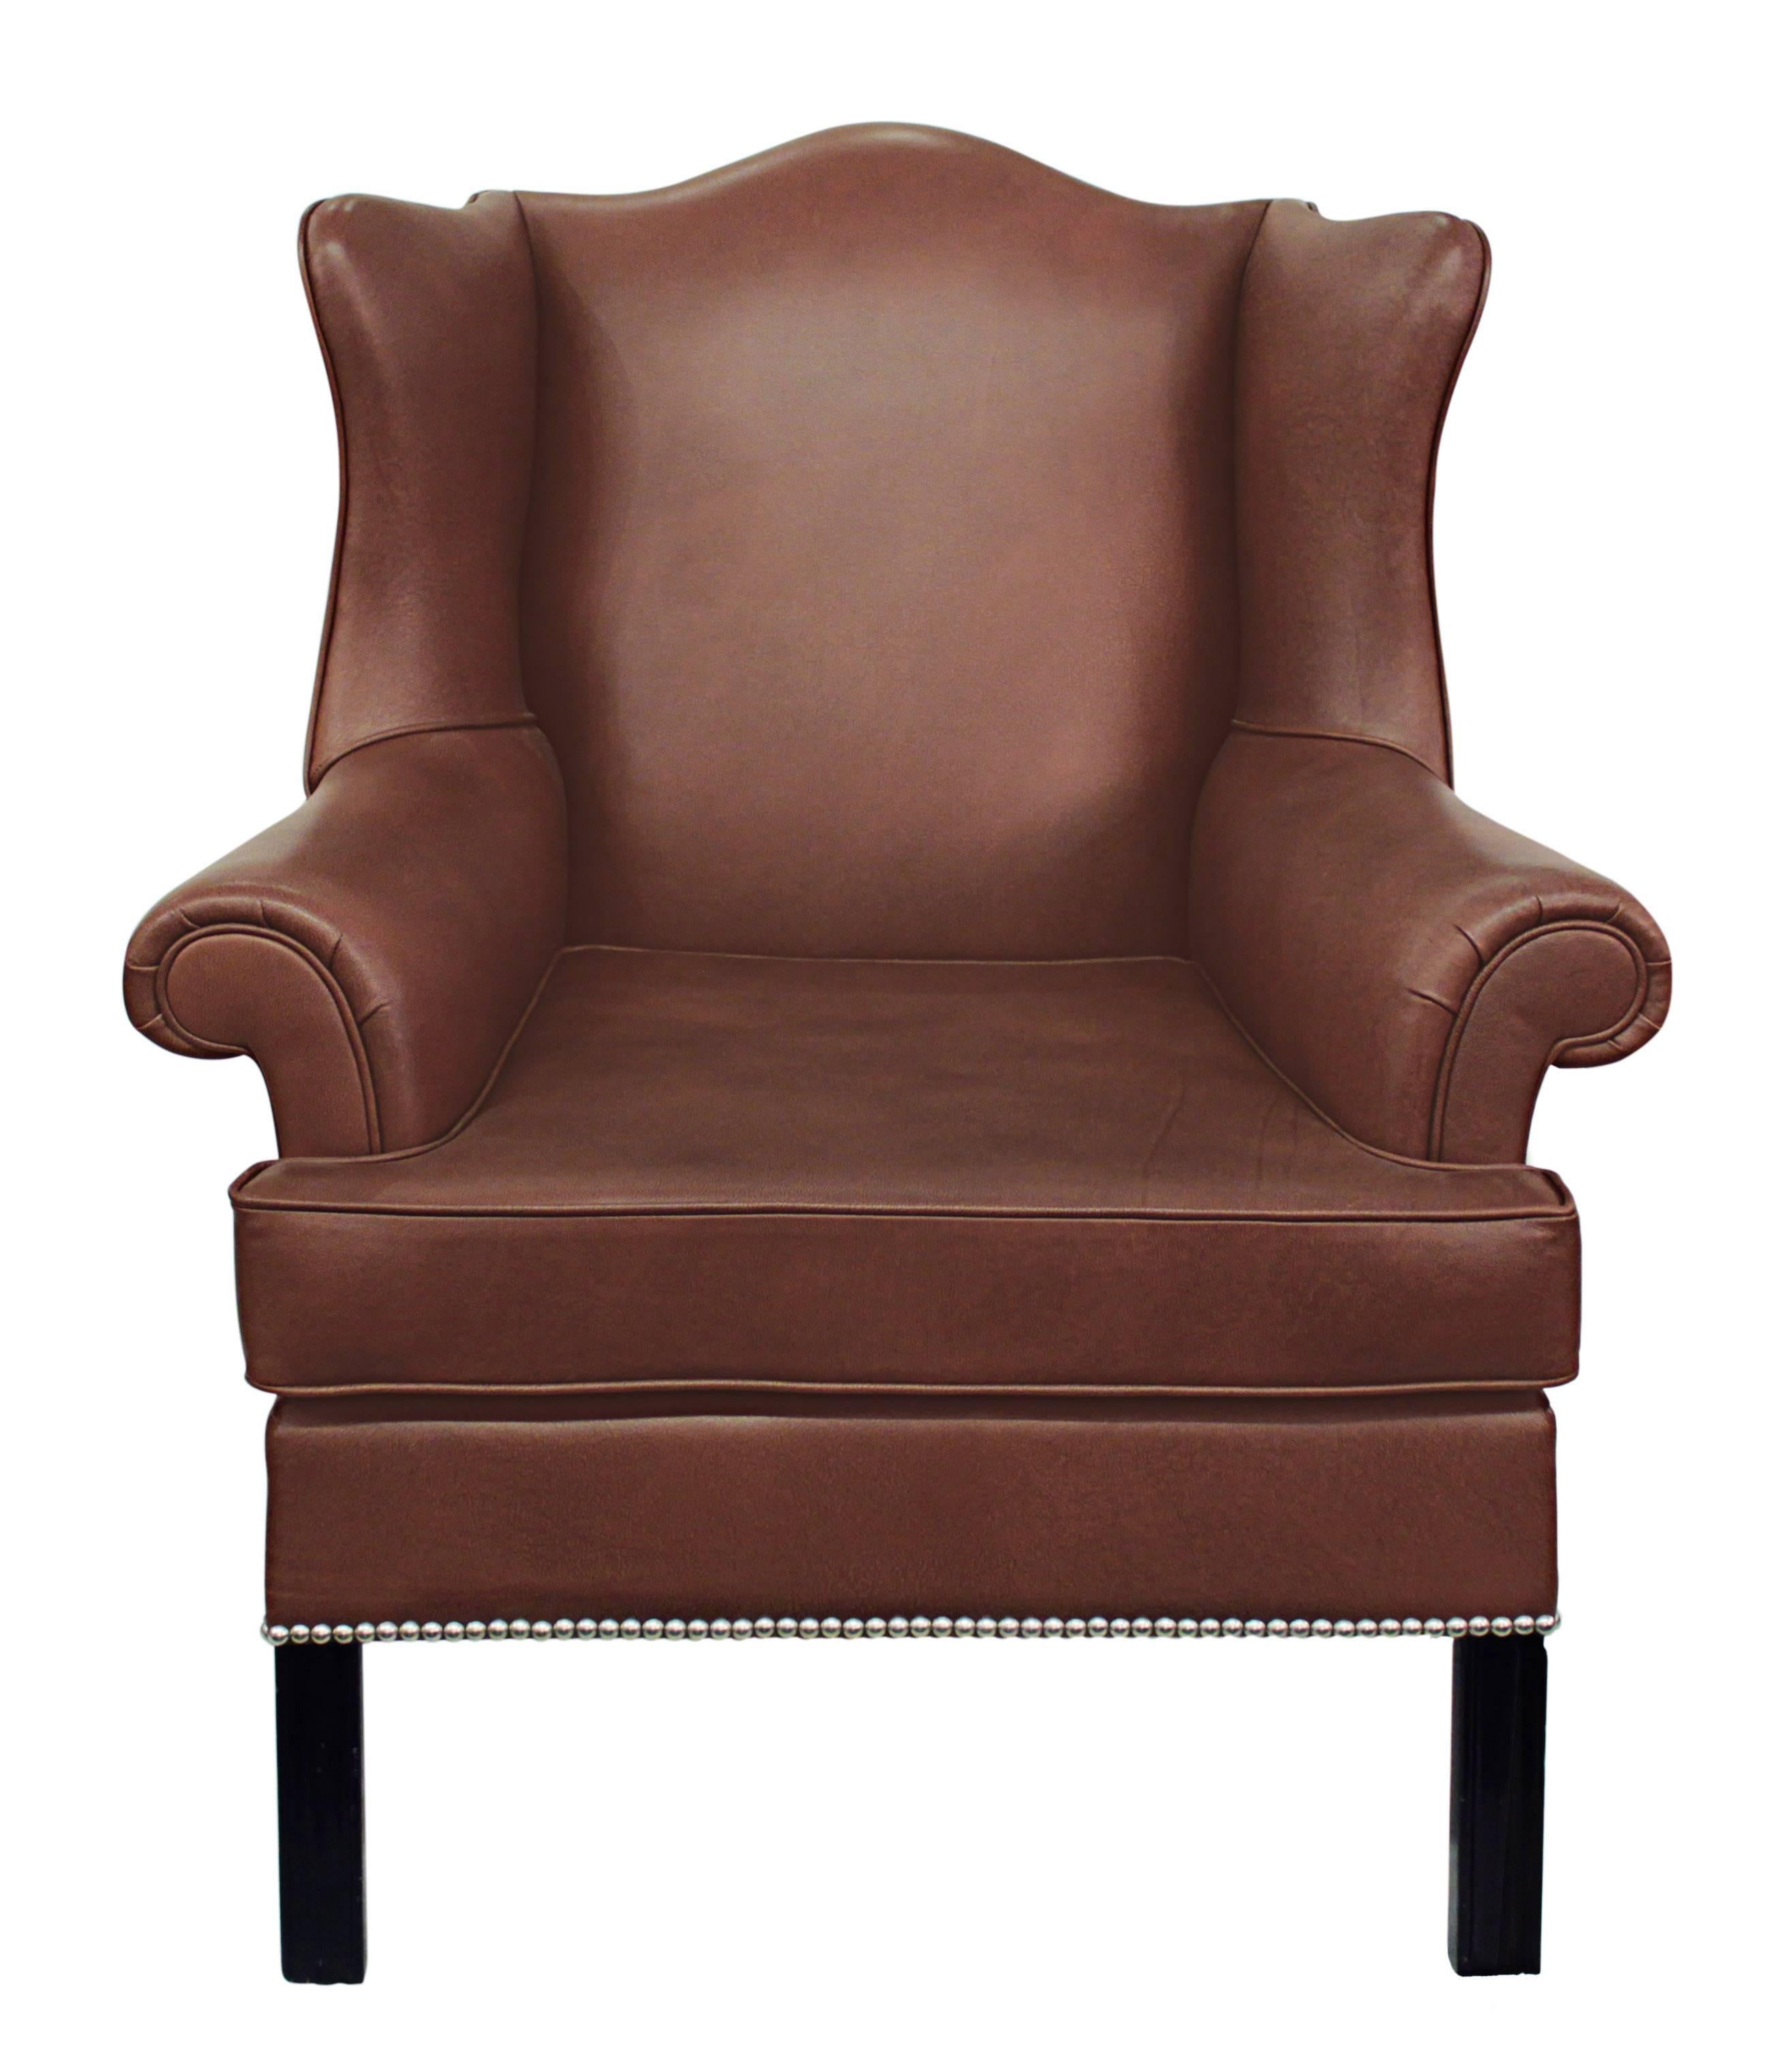 Small-scale wing chair No. 1710B with base in mahogany designed by Edward Wormley for Dunbar, American, 1930s. Refinished and reupholstered in chocolate brown leather with nickel studs. (Original label sewn back into chair.) This is an early elegant